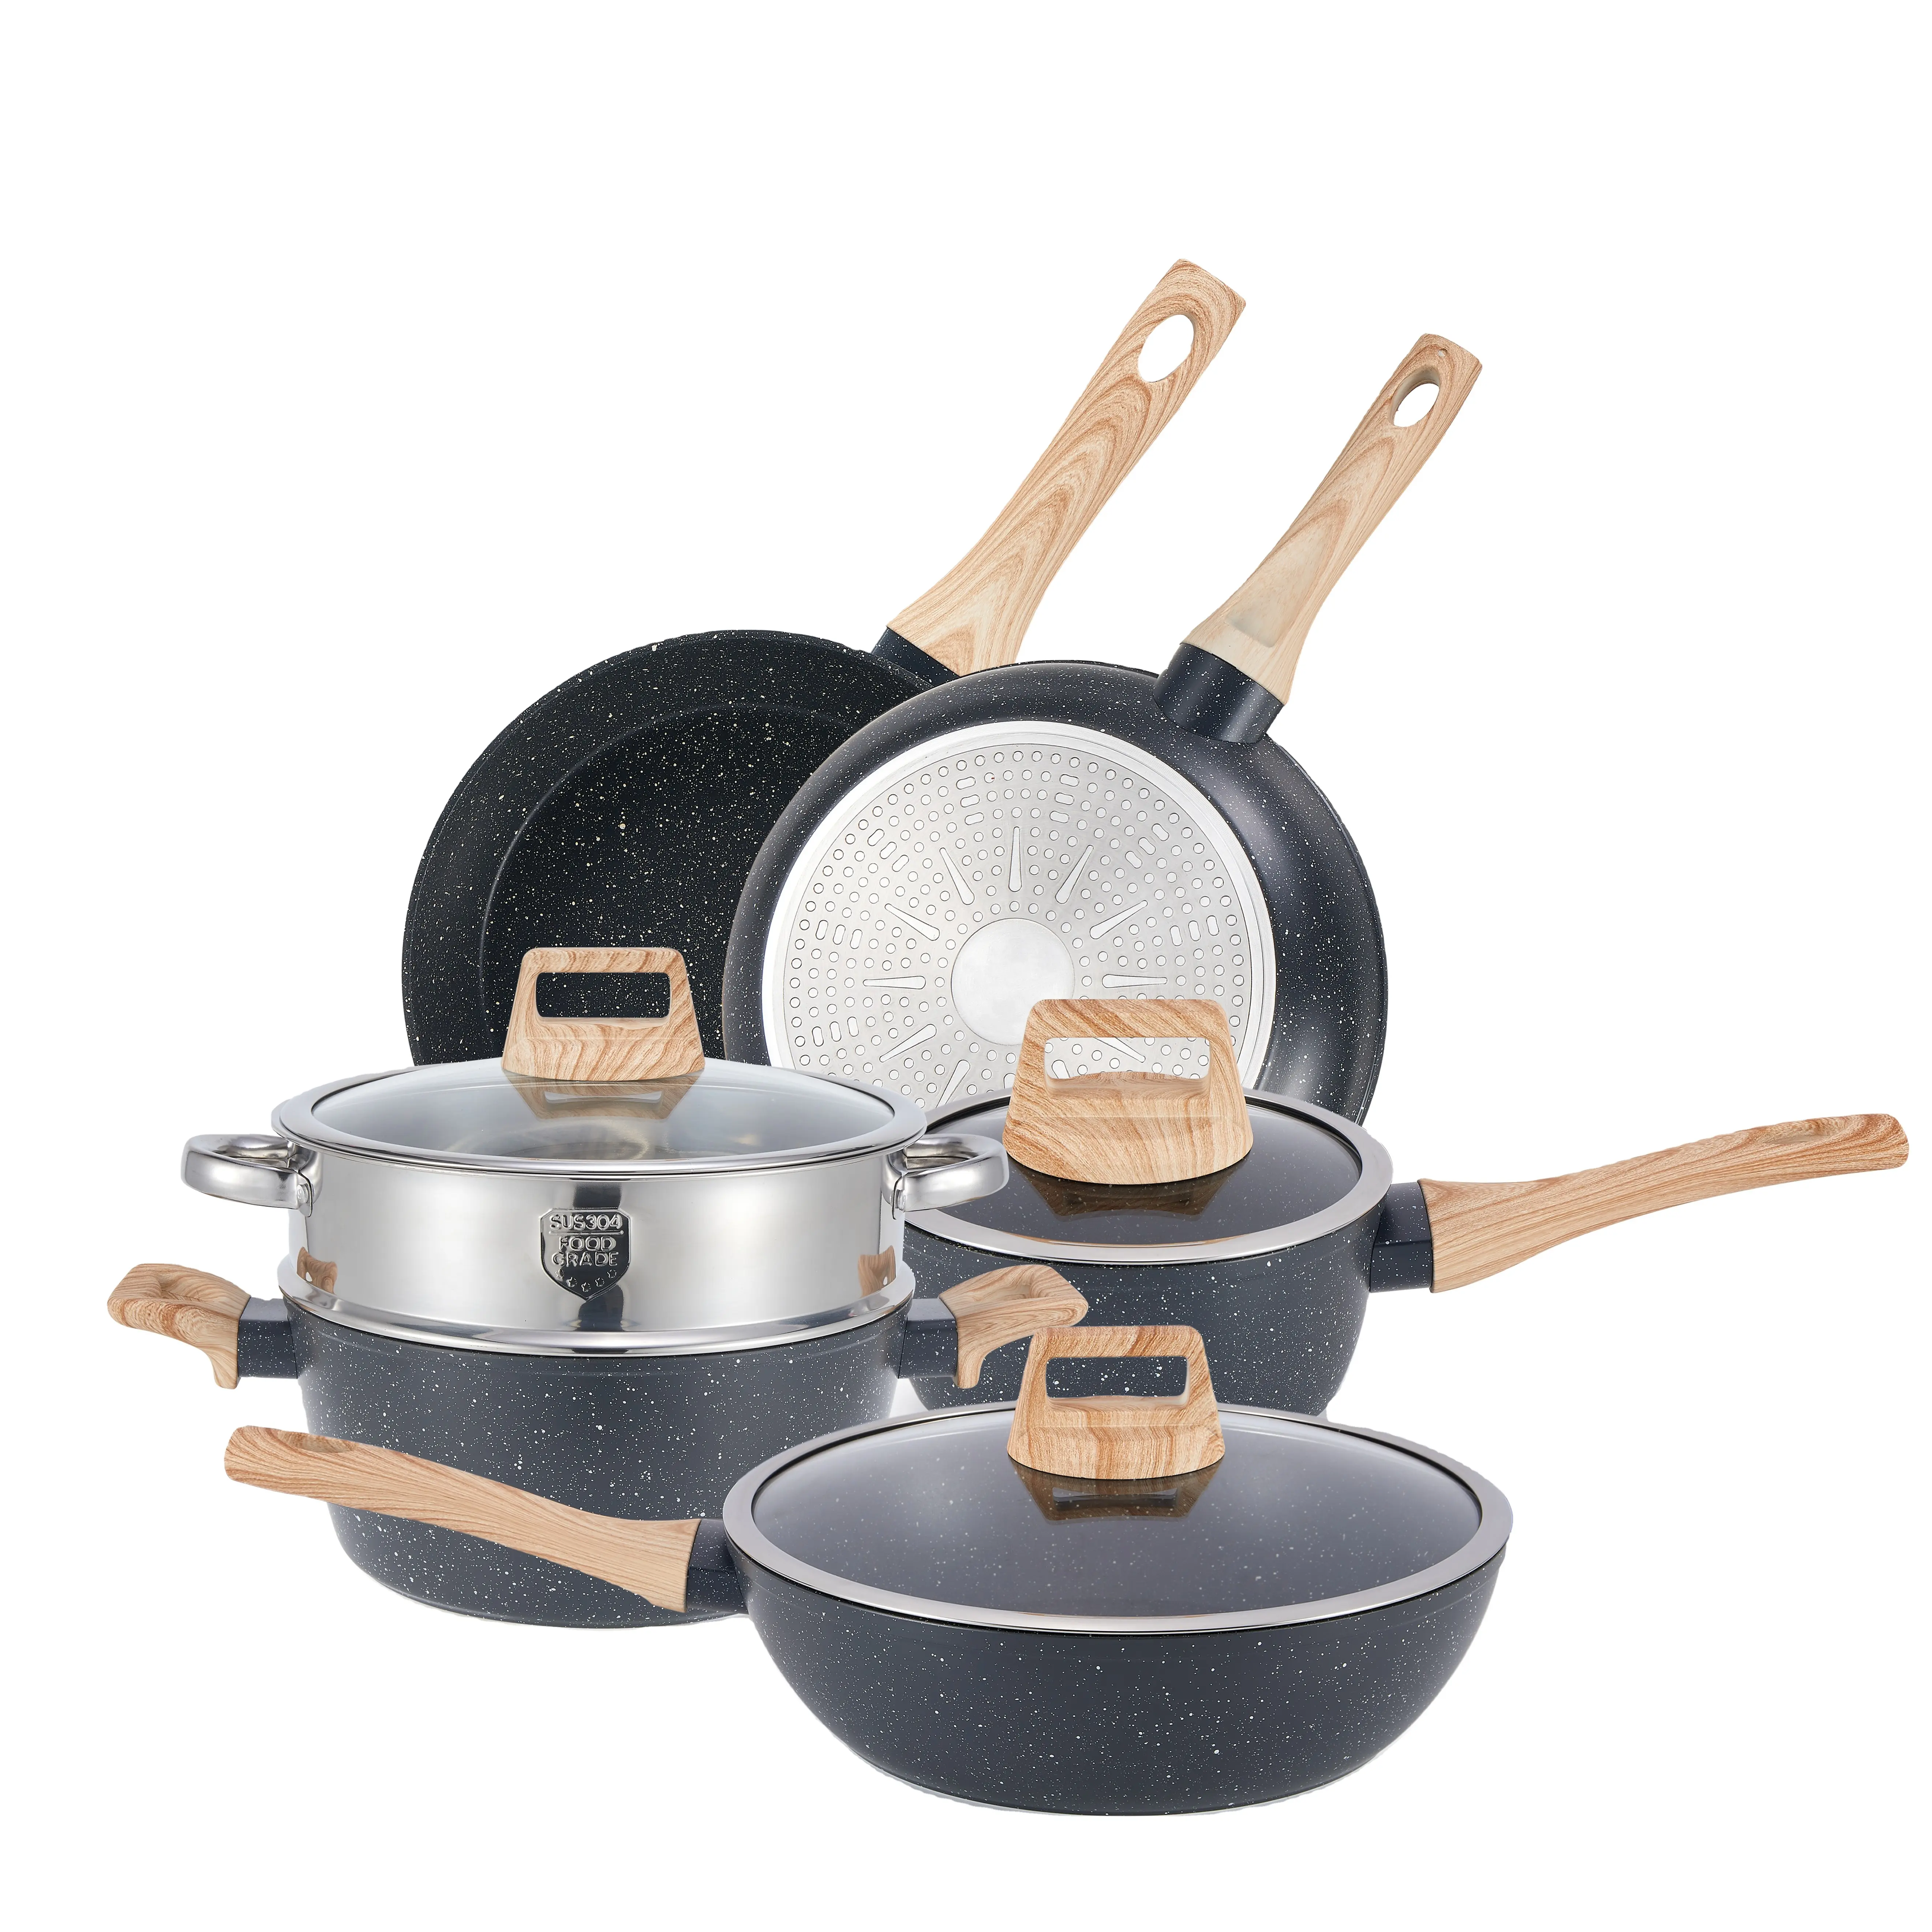 12-Pcs Non-Stick Pots Pans Set Eco-Friendly Glass Kitchen Cookware with 28 cm Induction Base for Home Use Granite Cooking Set